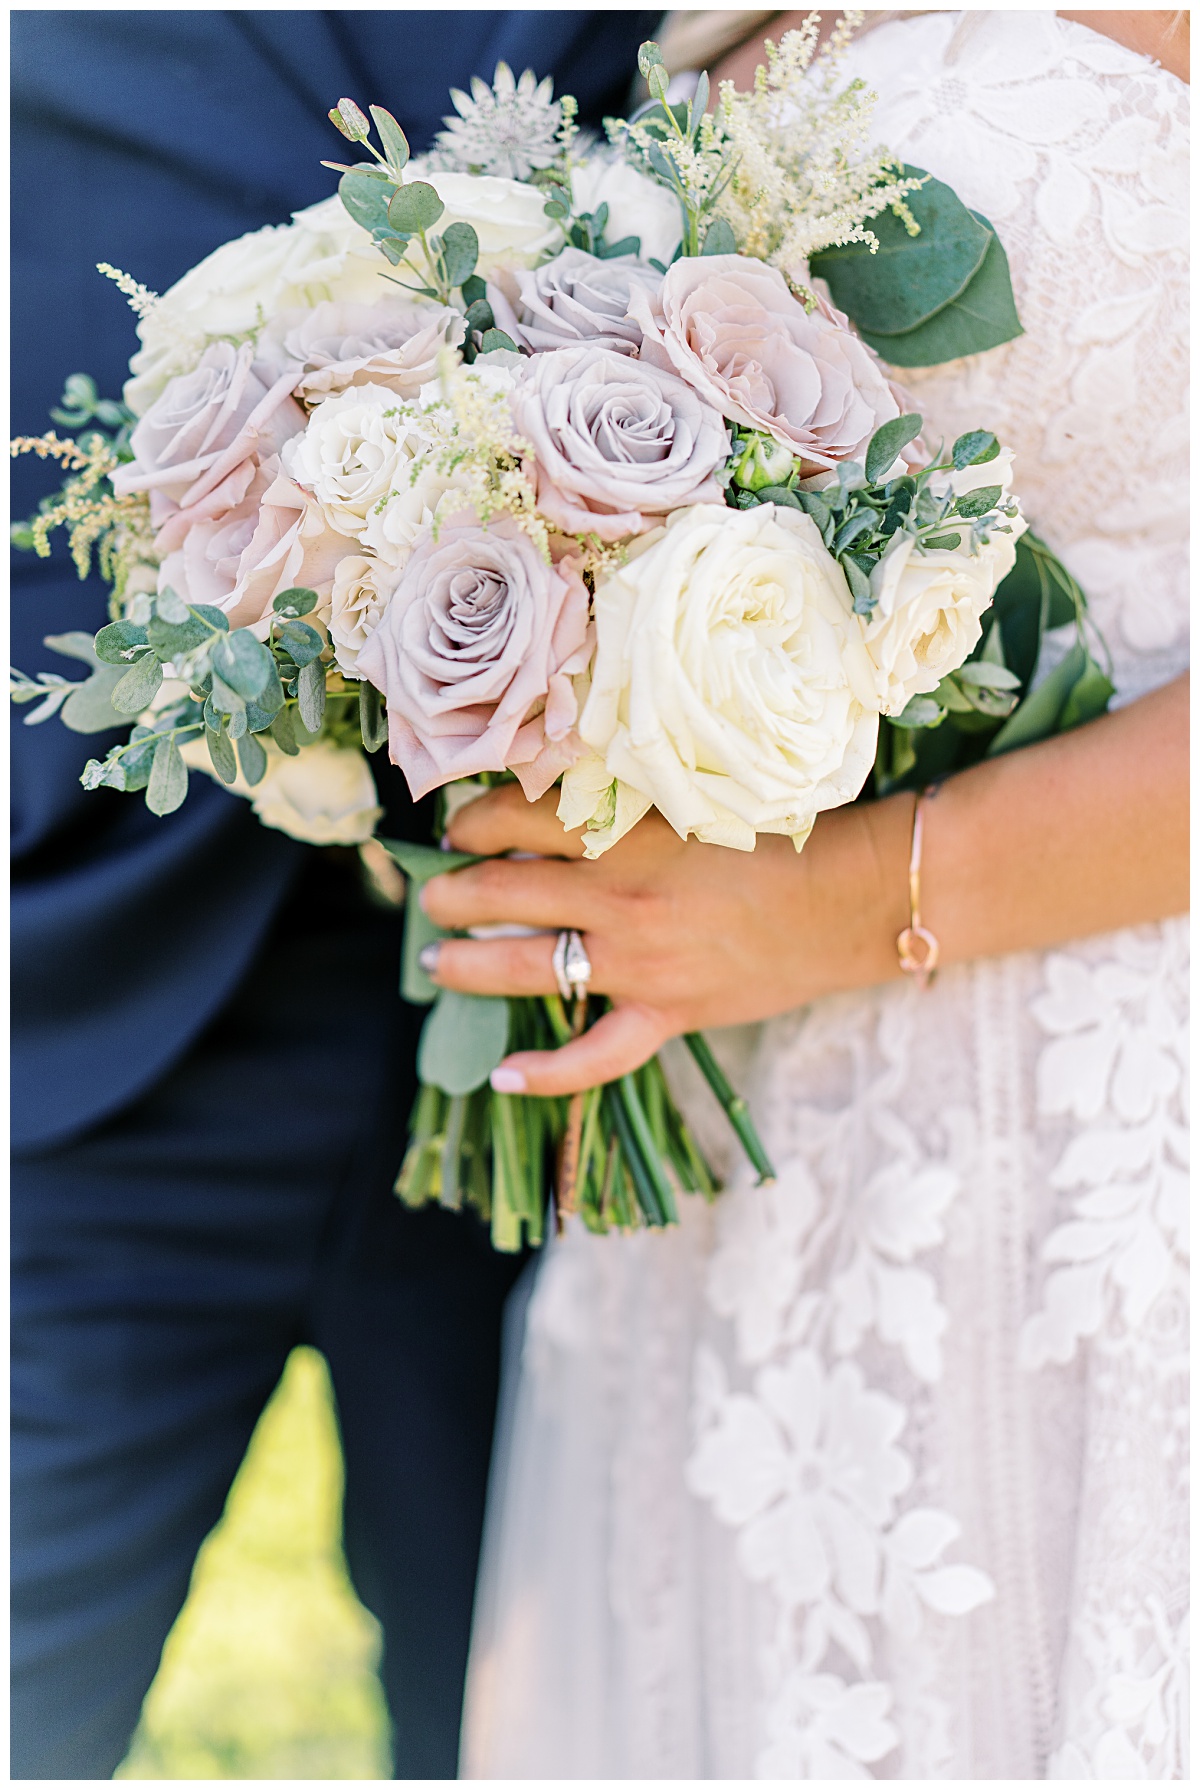 Round Gathered style Bridal bouquet at Houston's indoor-outdoor wedding venue in Bellville, TX. Alicia Yarrish Photography 